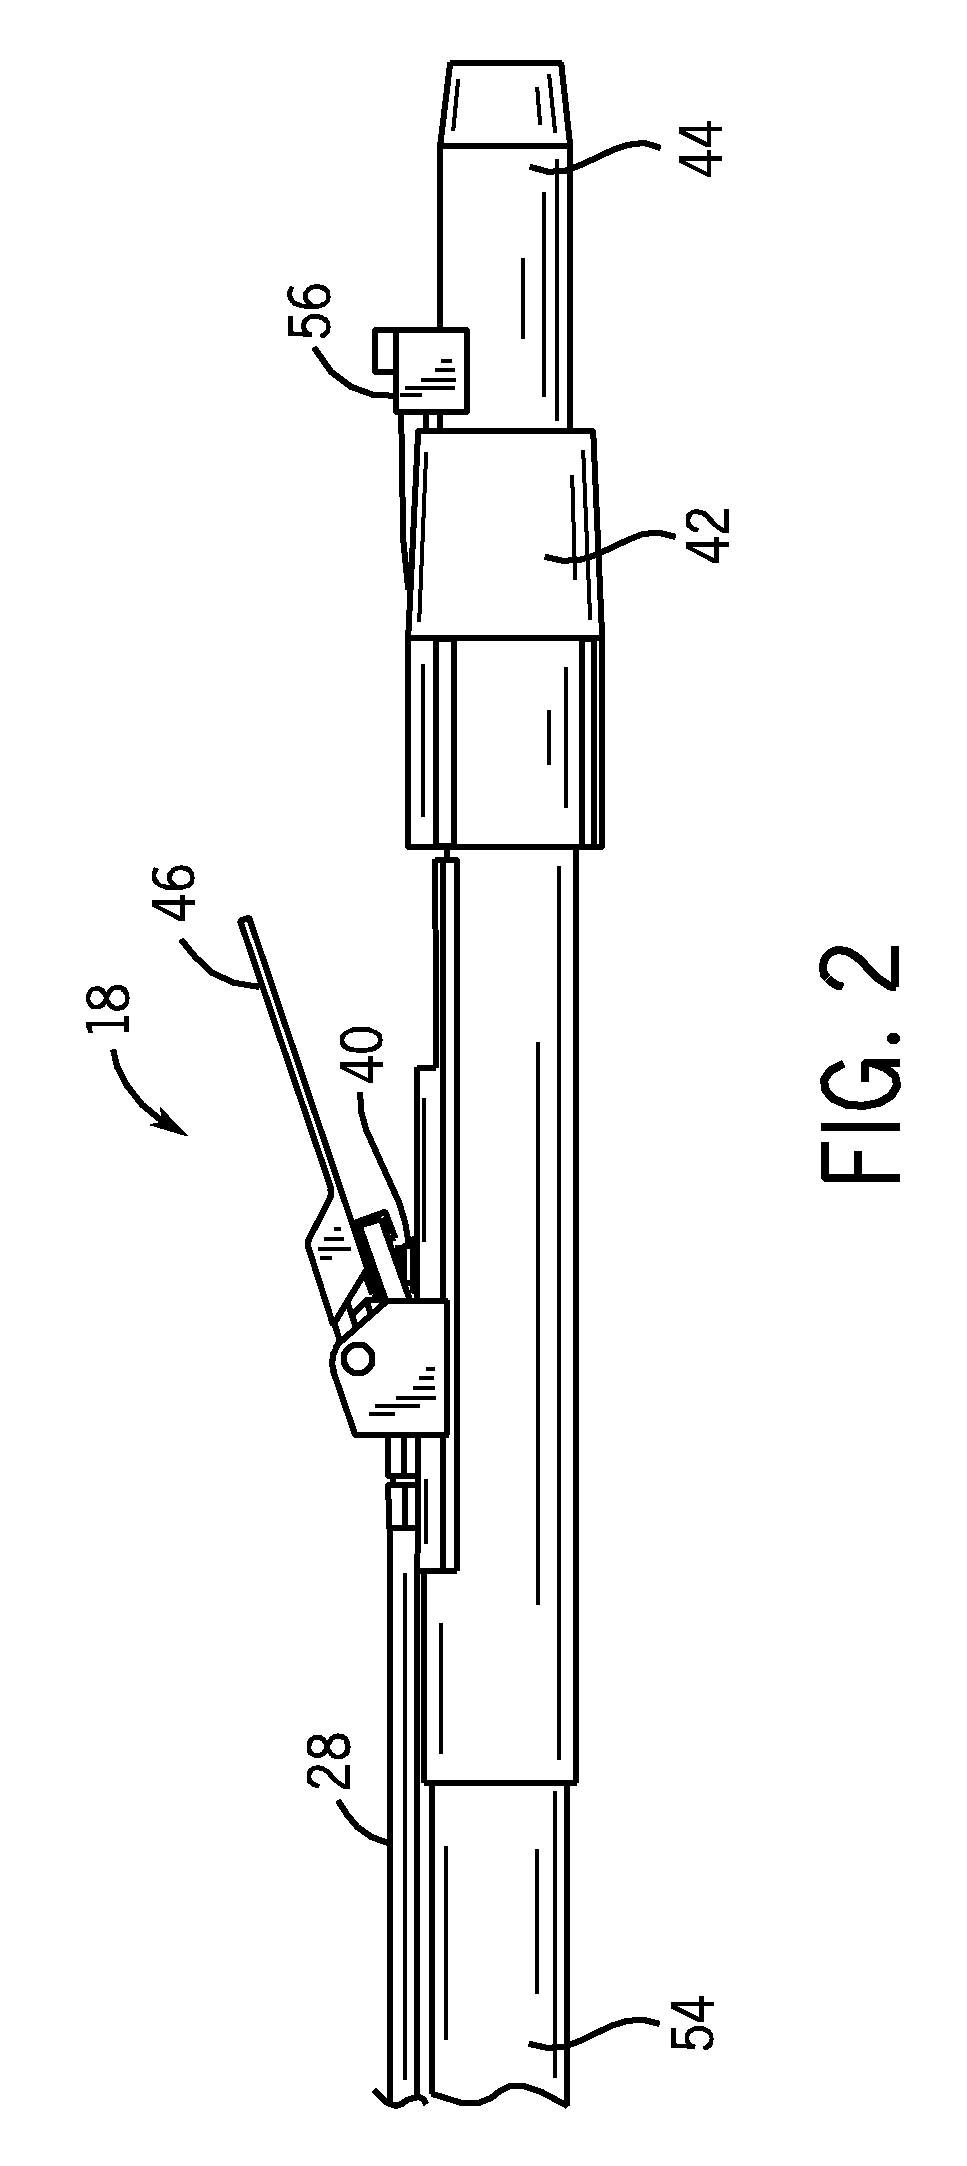 Virtual blasting system for removal of coating and/or rust from a virtual surface